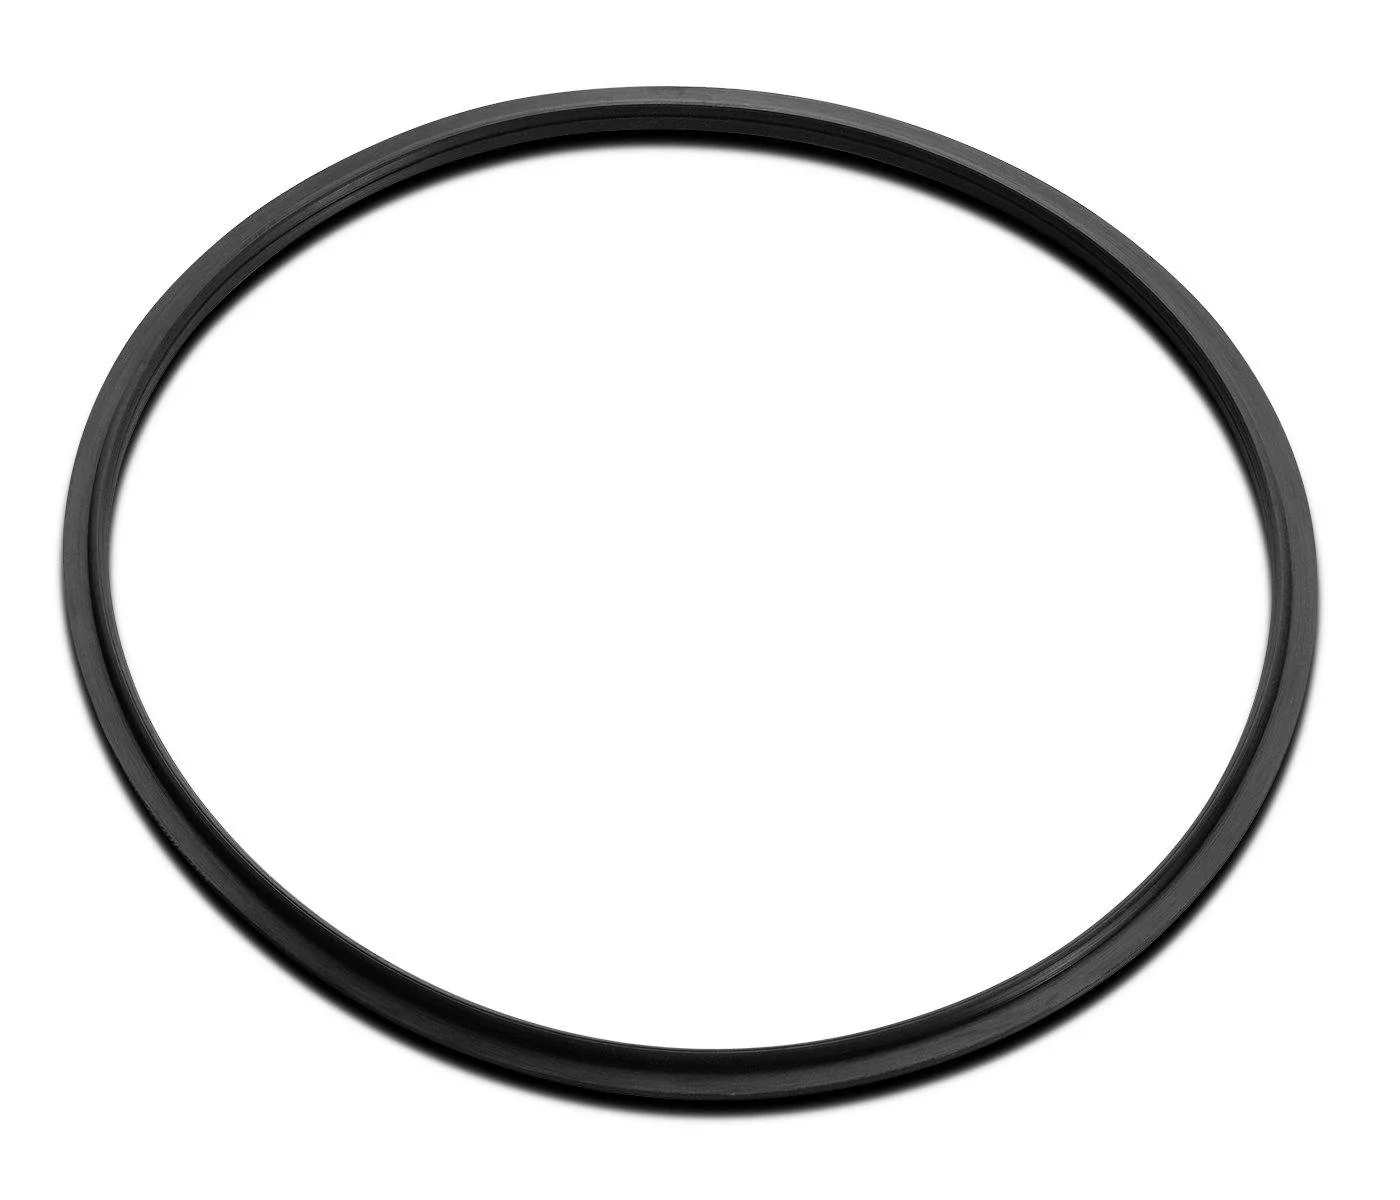 Replacement Gasket for Dutch Weave Sintered Filter Disks - Buna-N Questions & Answers